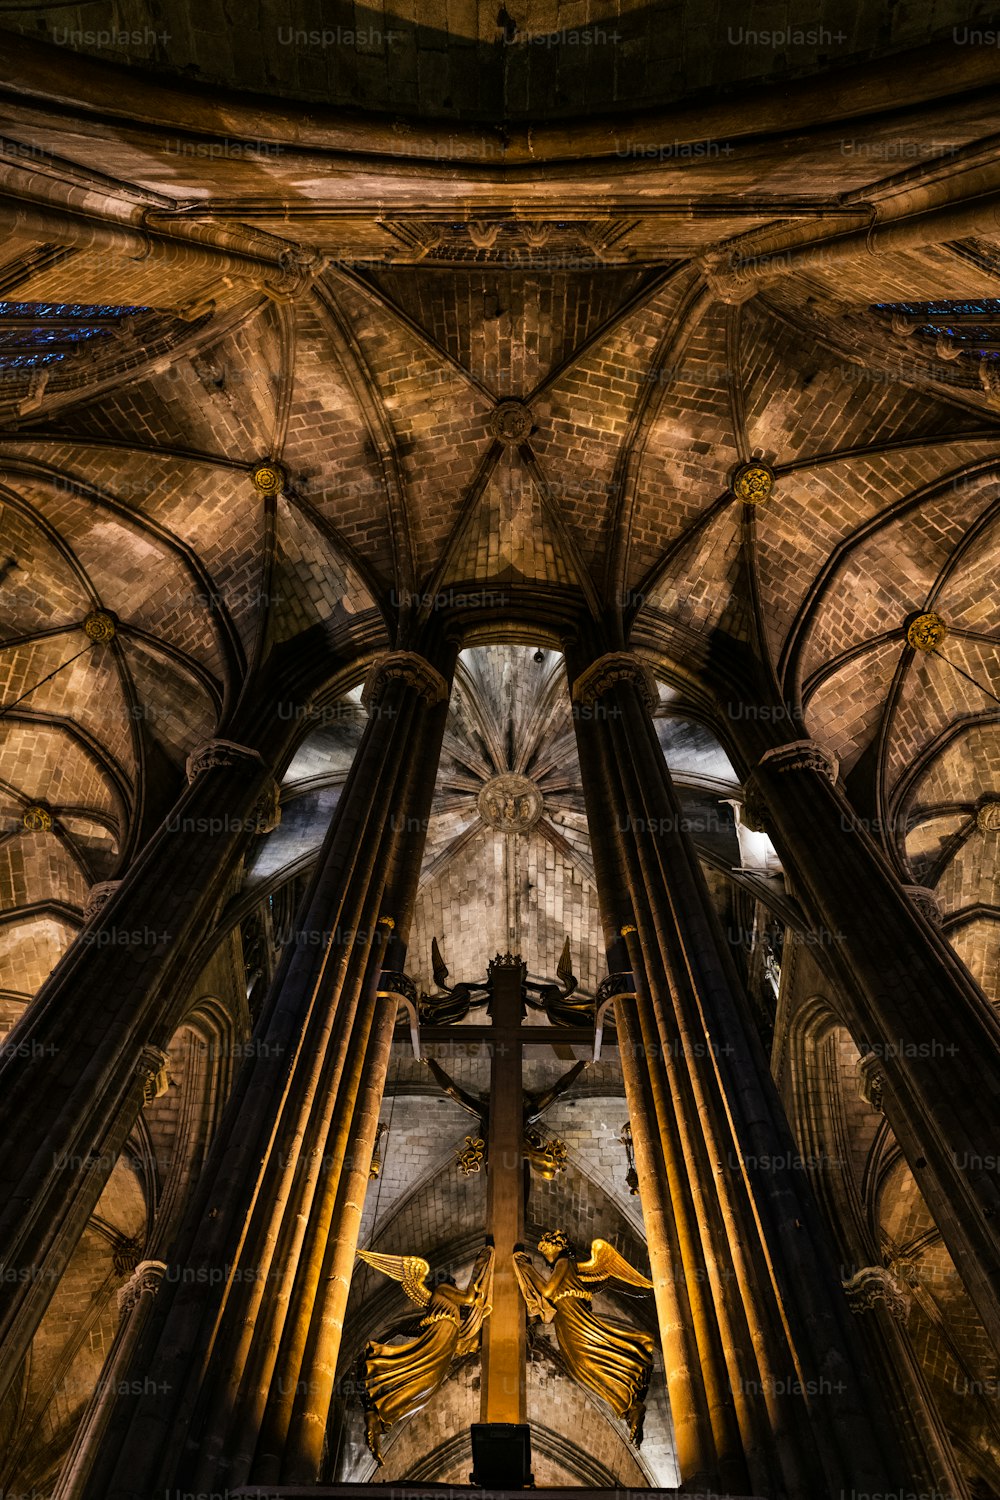 Inside view of Barcelona's gothic Cathedral, also known as La Seu, located in the heart of Barcelona's Gothic Quarter.